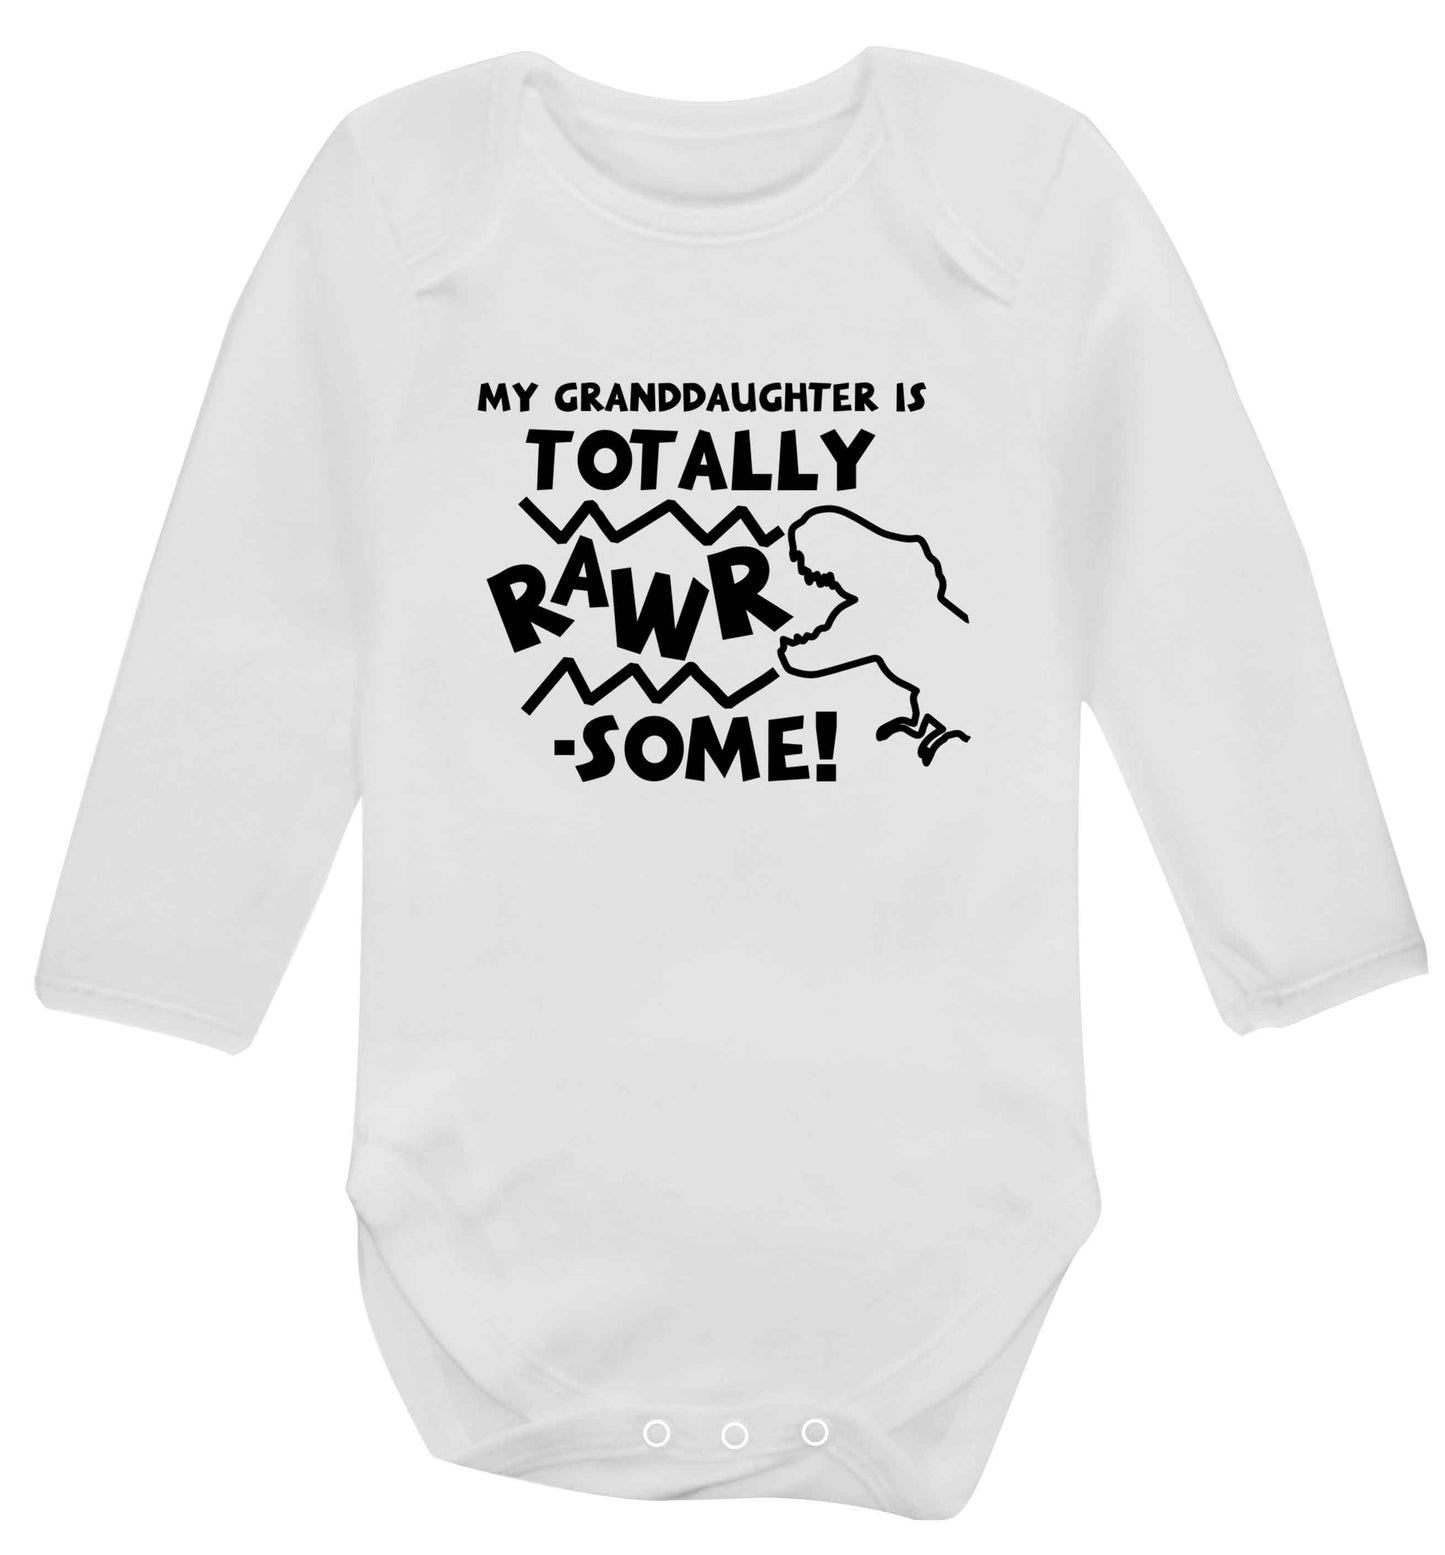 My granddaughter is totally rawrsome baby vest long sleeved white 6-12 months